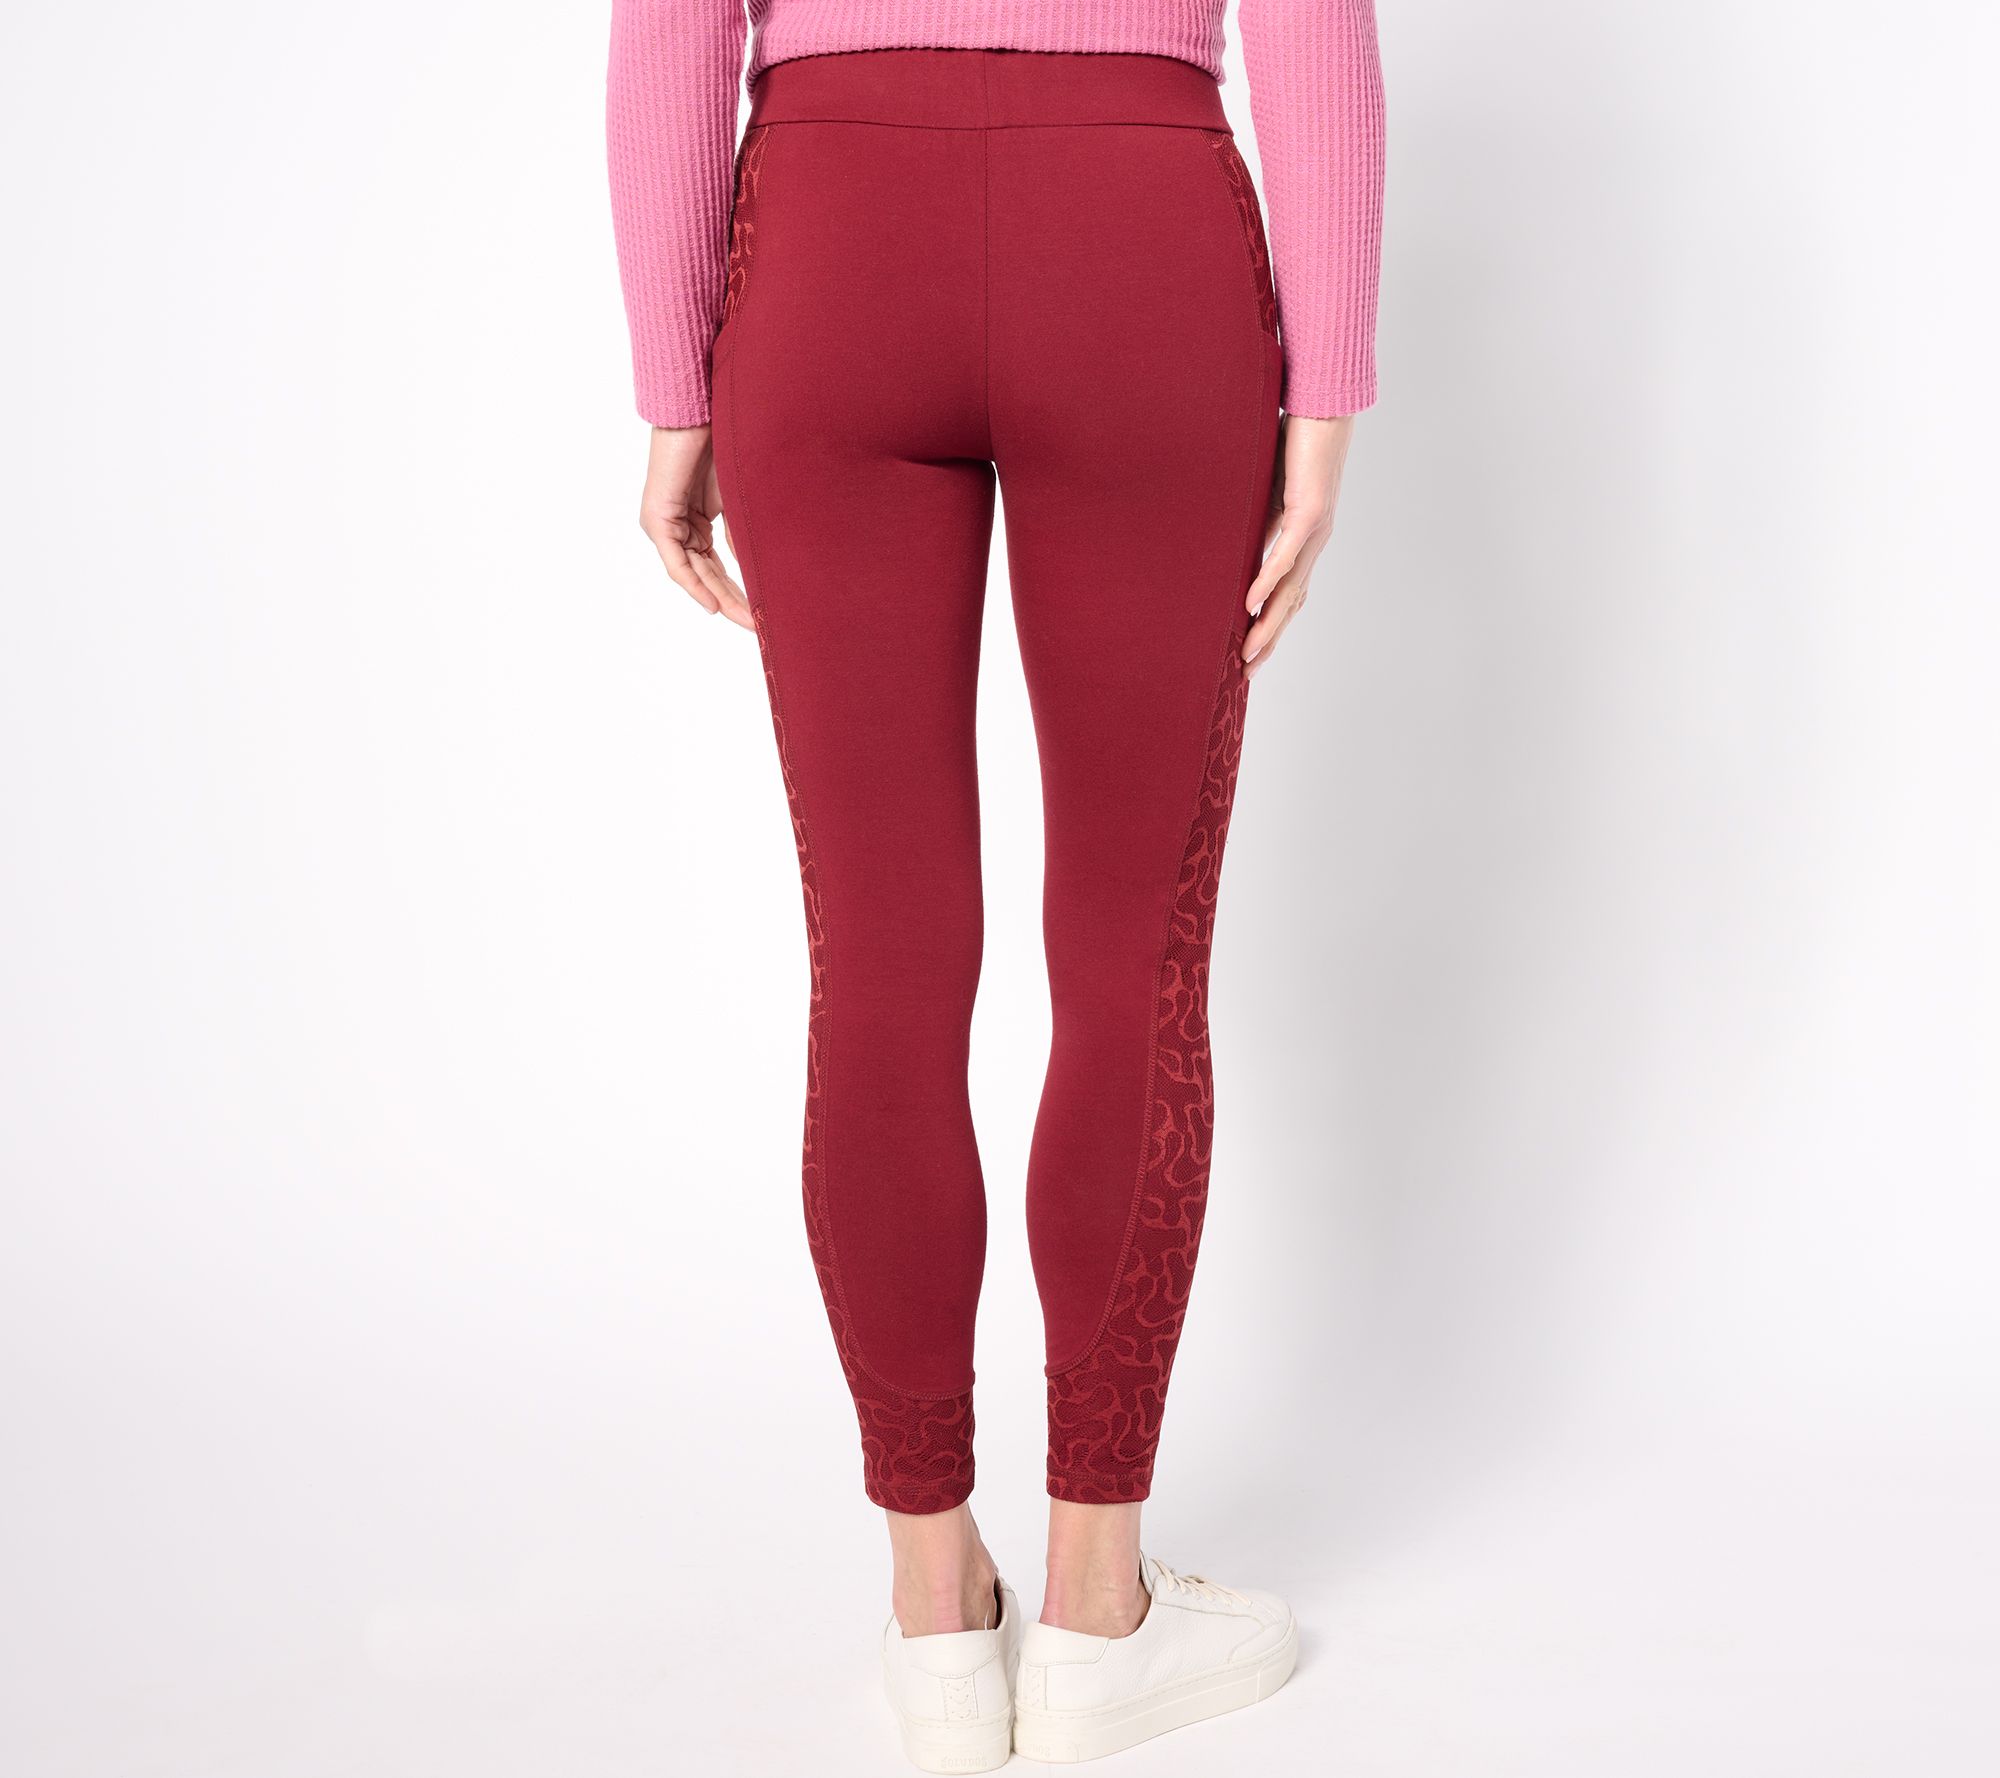 Juniors' Eye Candy Lace-Up High-Waisted Leggings